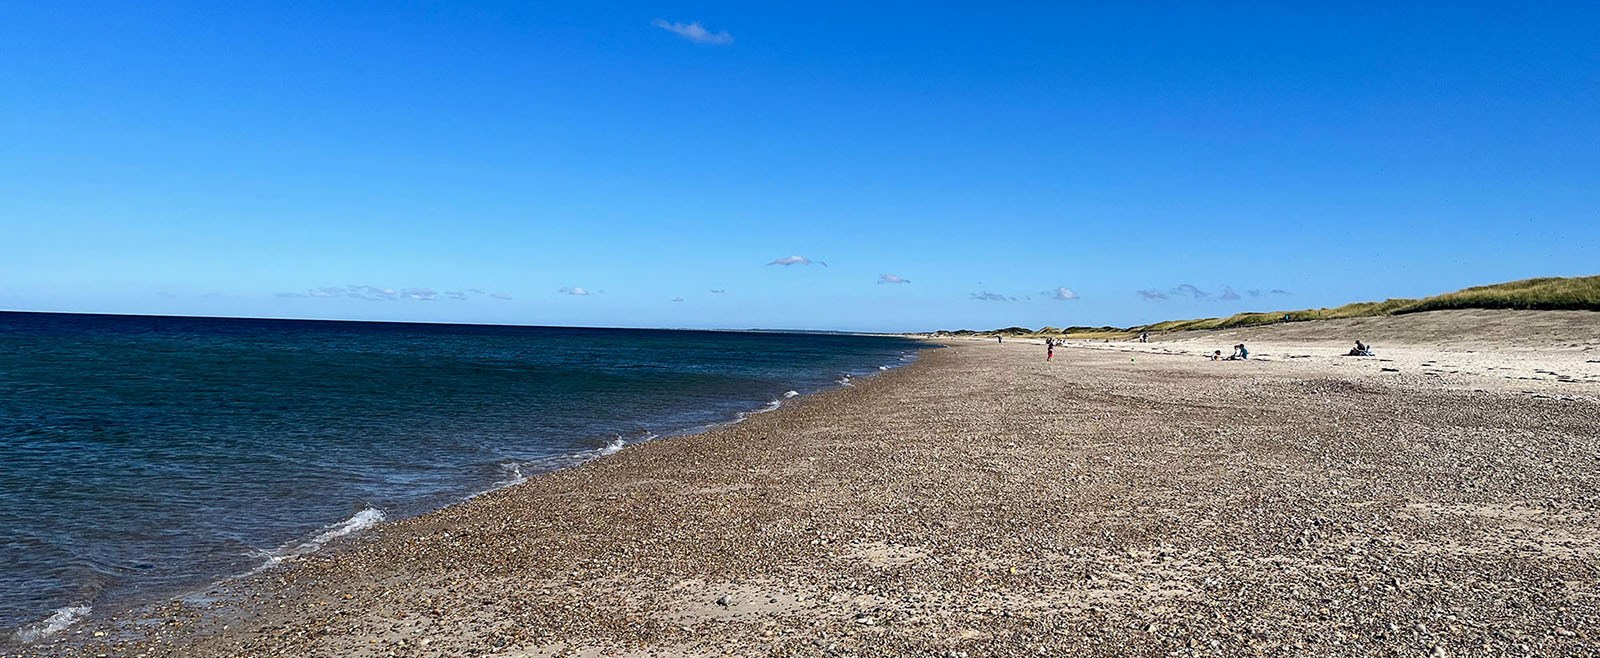 The Upper Cape is comprised of lovely boutique shops, peaceful and serene beaches, highly-praise seafood restaurants, and so much more. Explore all this region of Cape Cod has to offer!